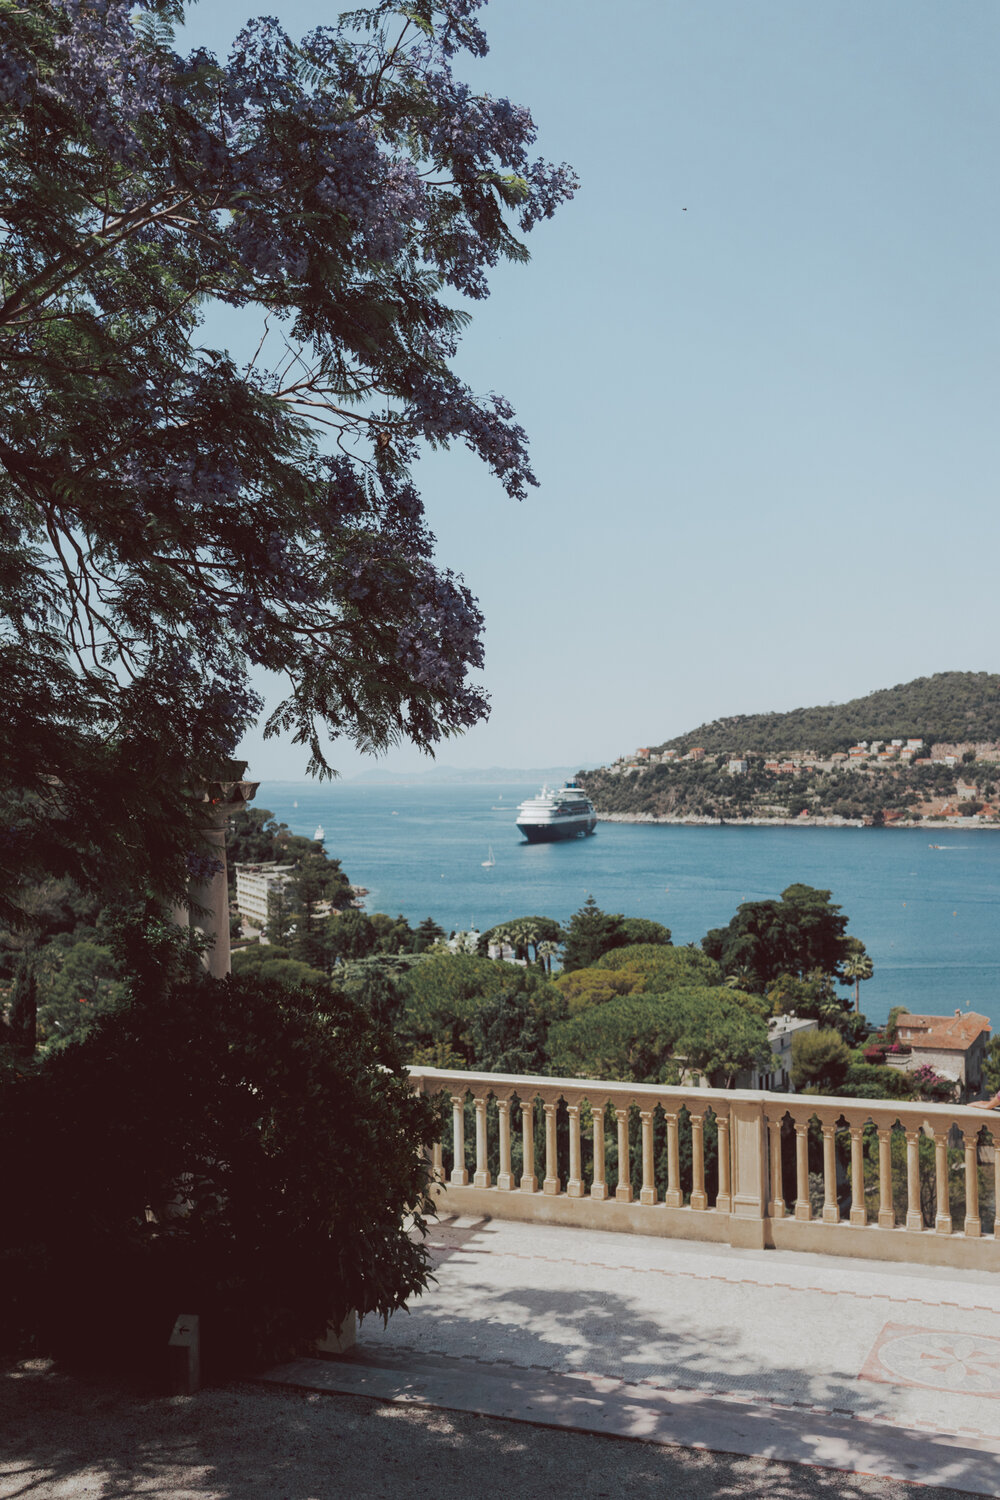 Villa Ephrussi | South of France | French Riviera | Things to see in French Riviera | Day Trip from Nice | Day Trip from Monaco | French Villa 